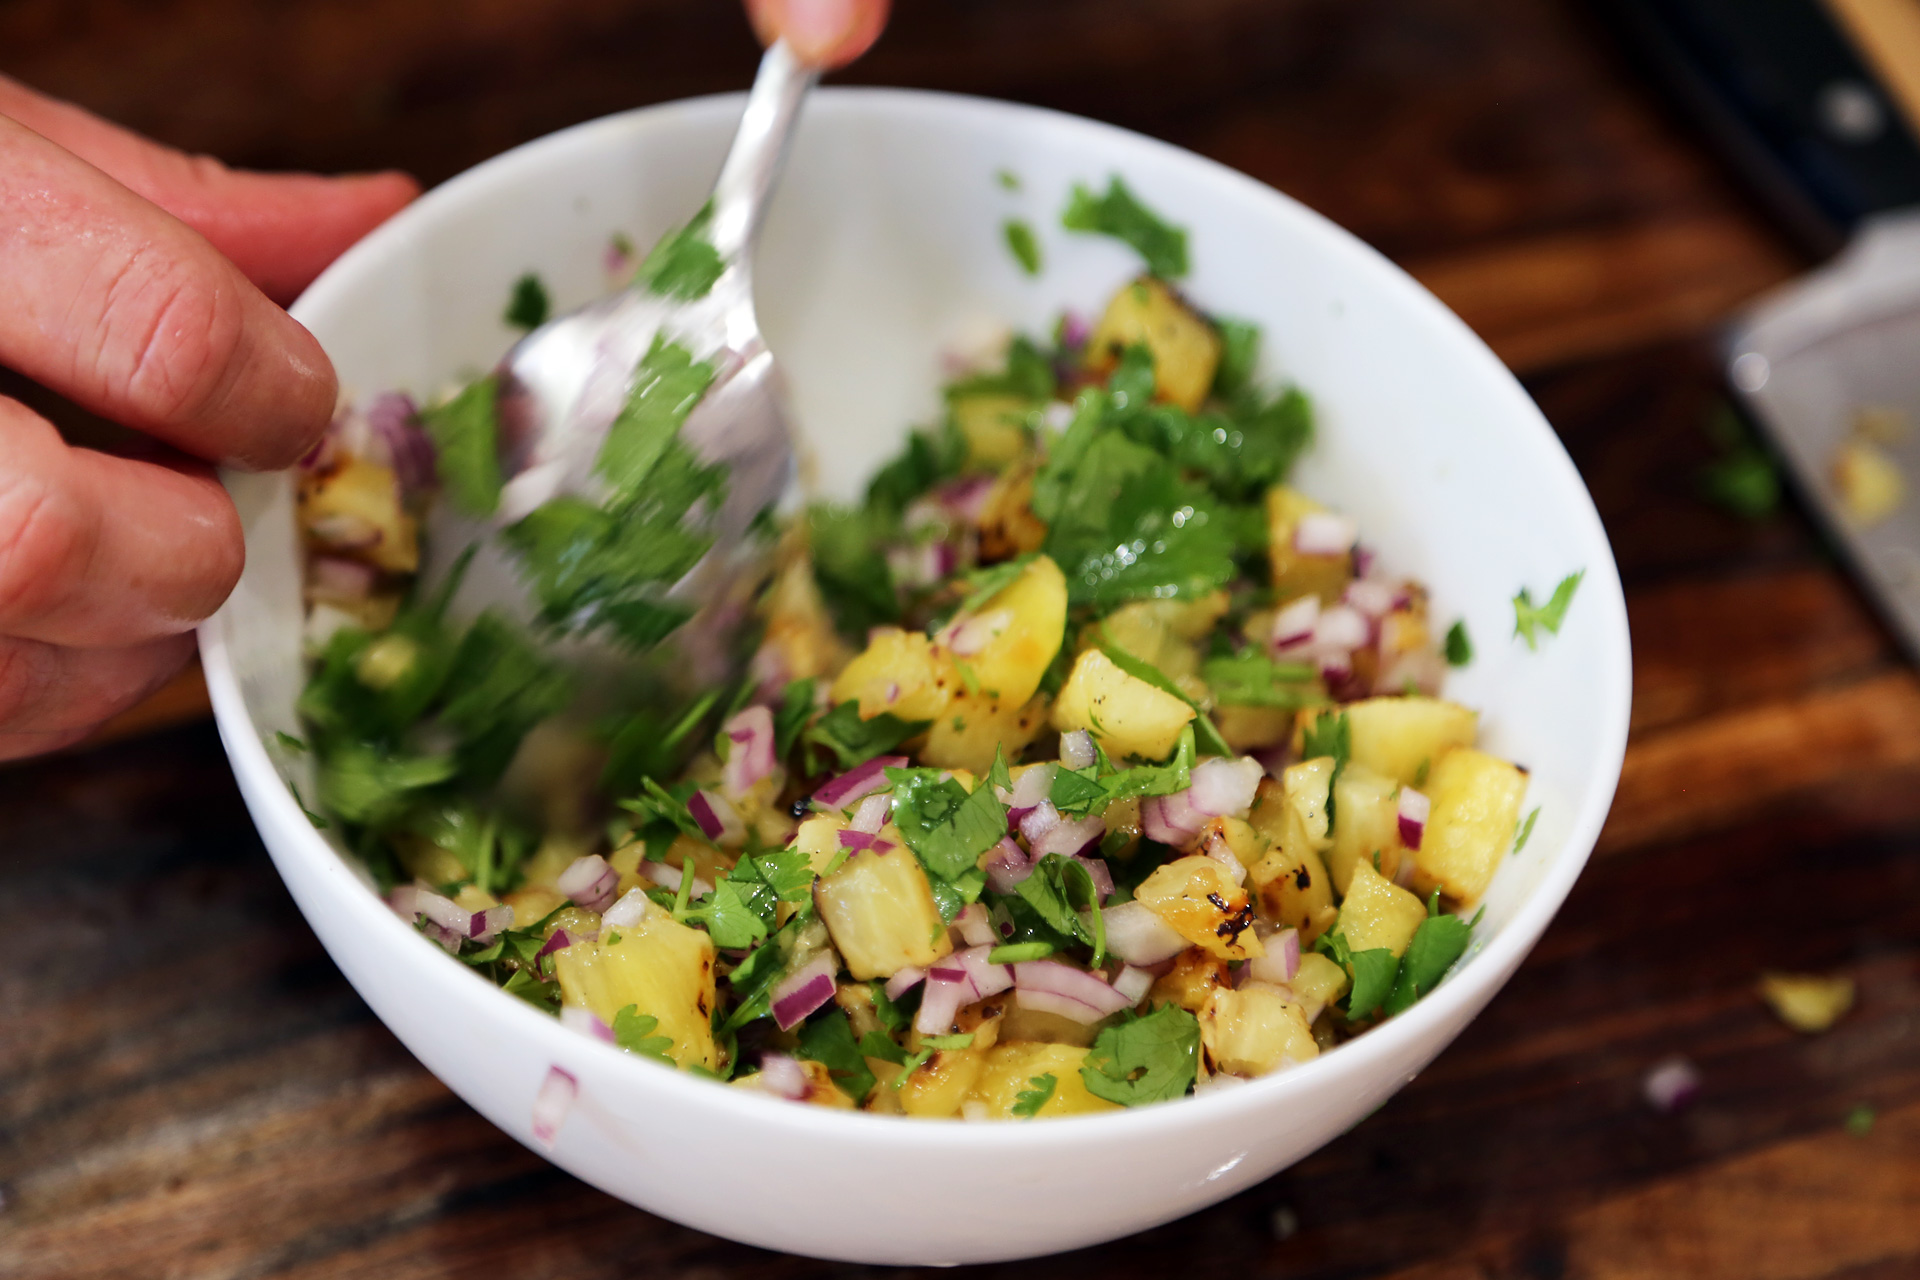 Toss pineapple with the red onion, cilantro, jalapeno if using, and lime juice and set aside.